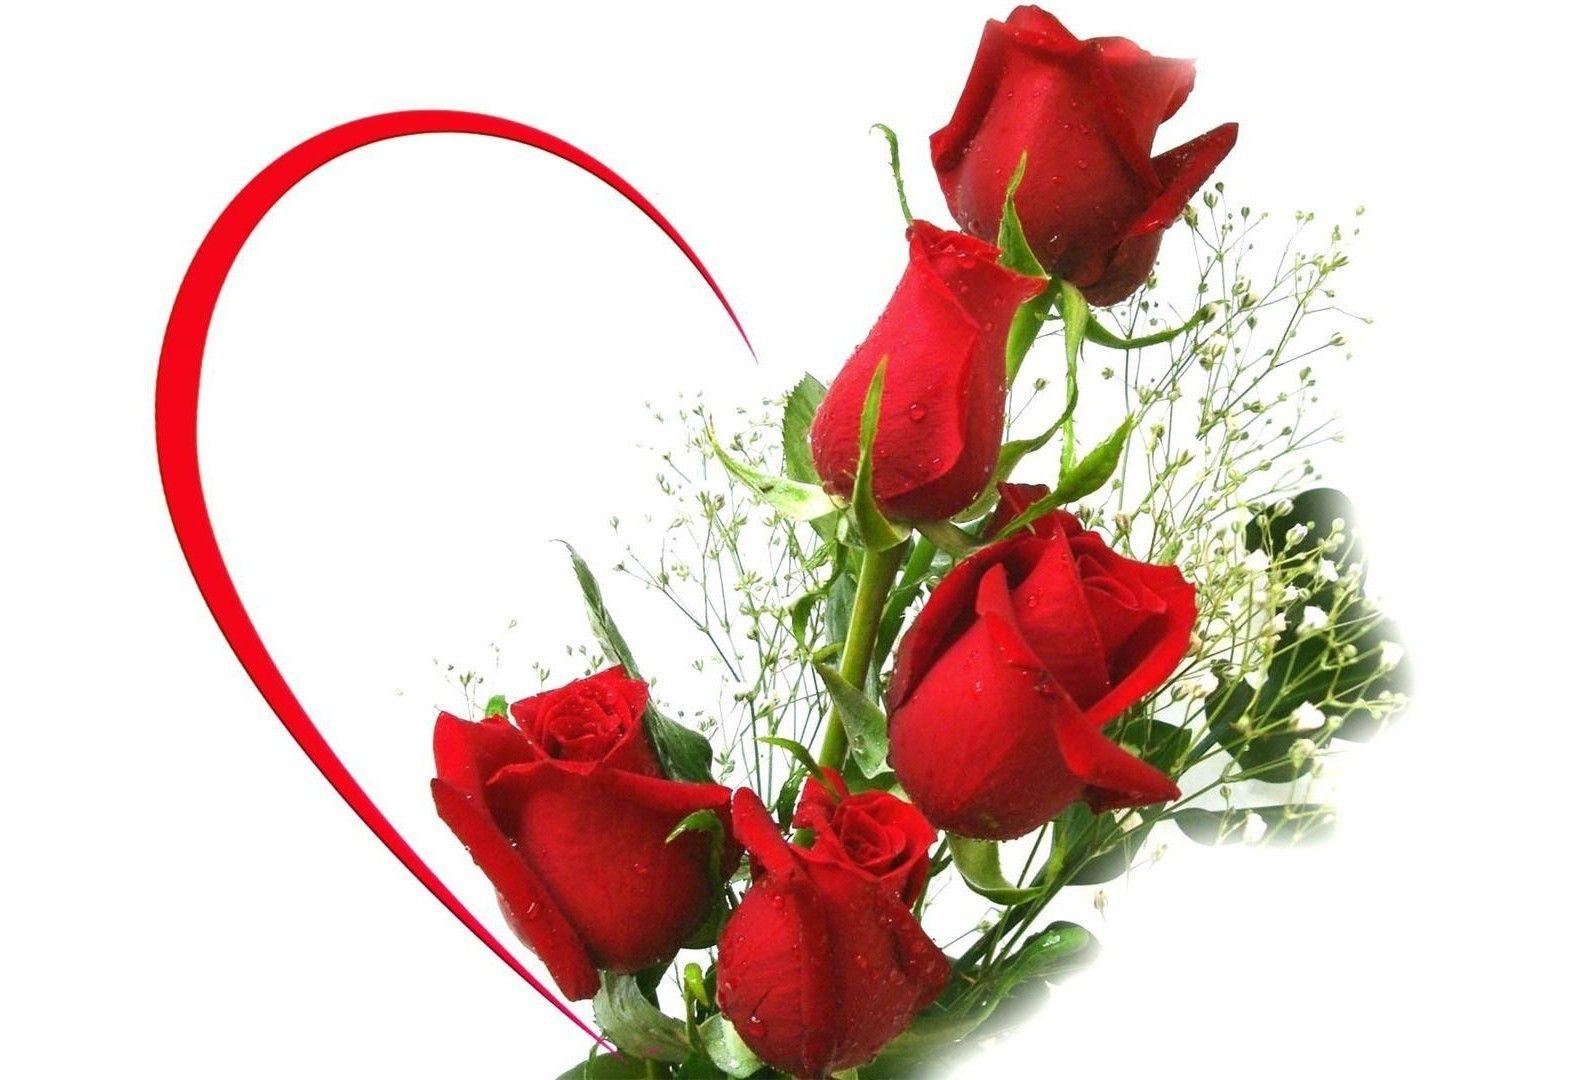 Red Rose Heart Bouquet 1595 1080 High Definition Wallpaper Daily